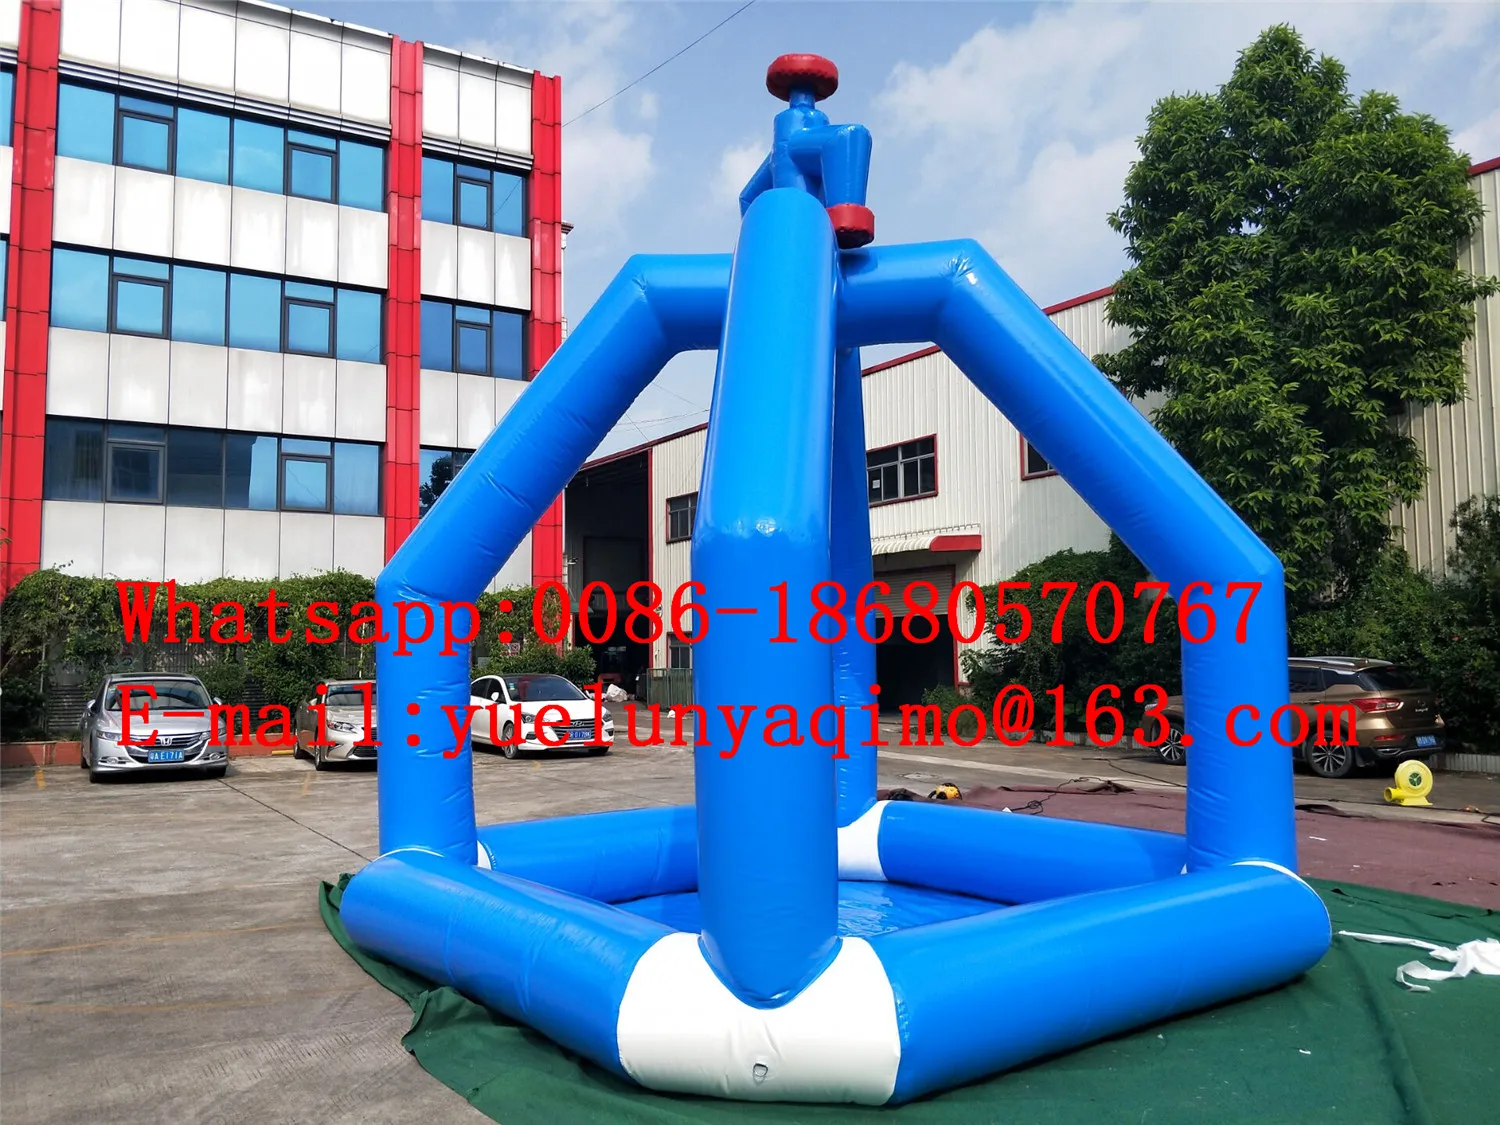 

Manufacturers selling inflatable pool slide castle trampoline combination YLY-042